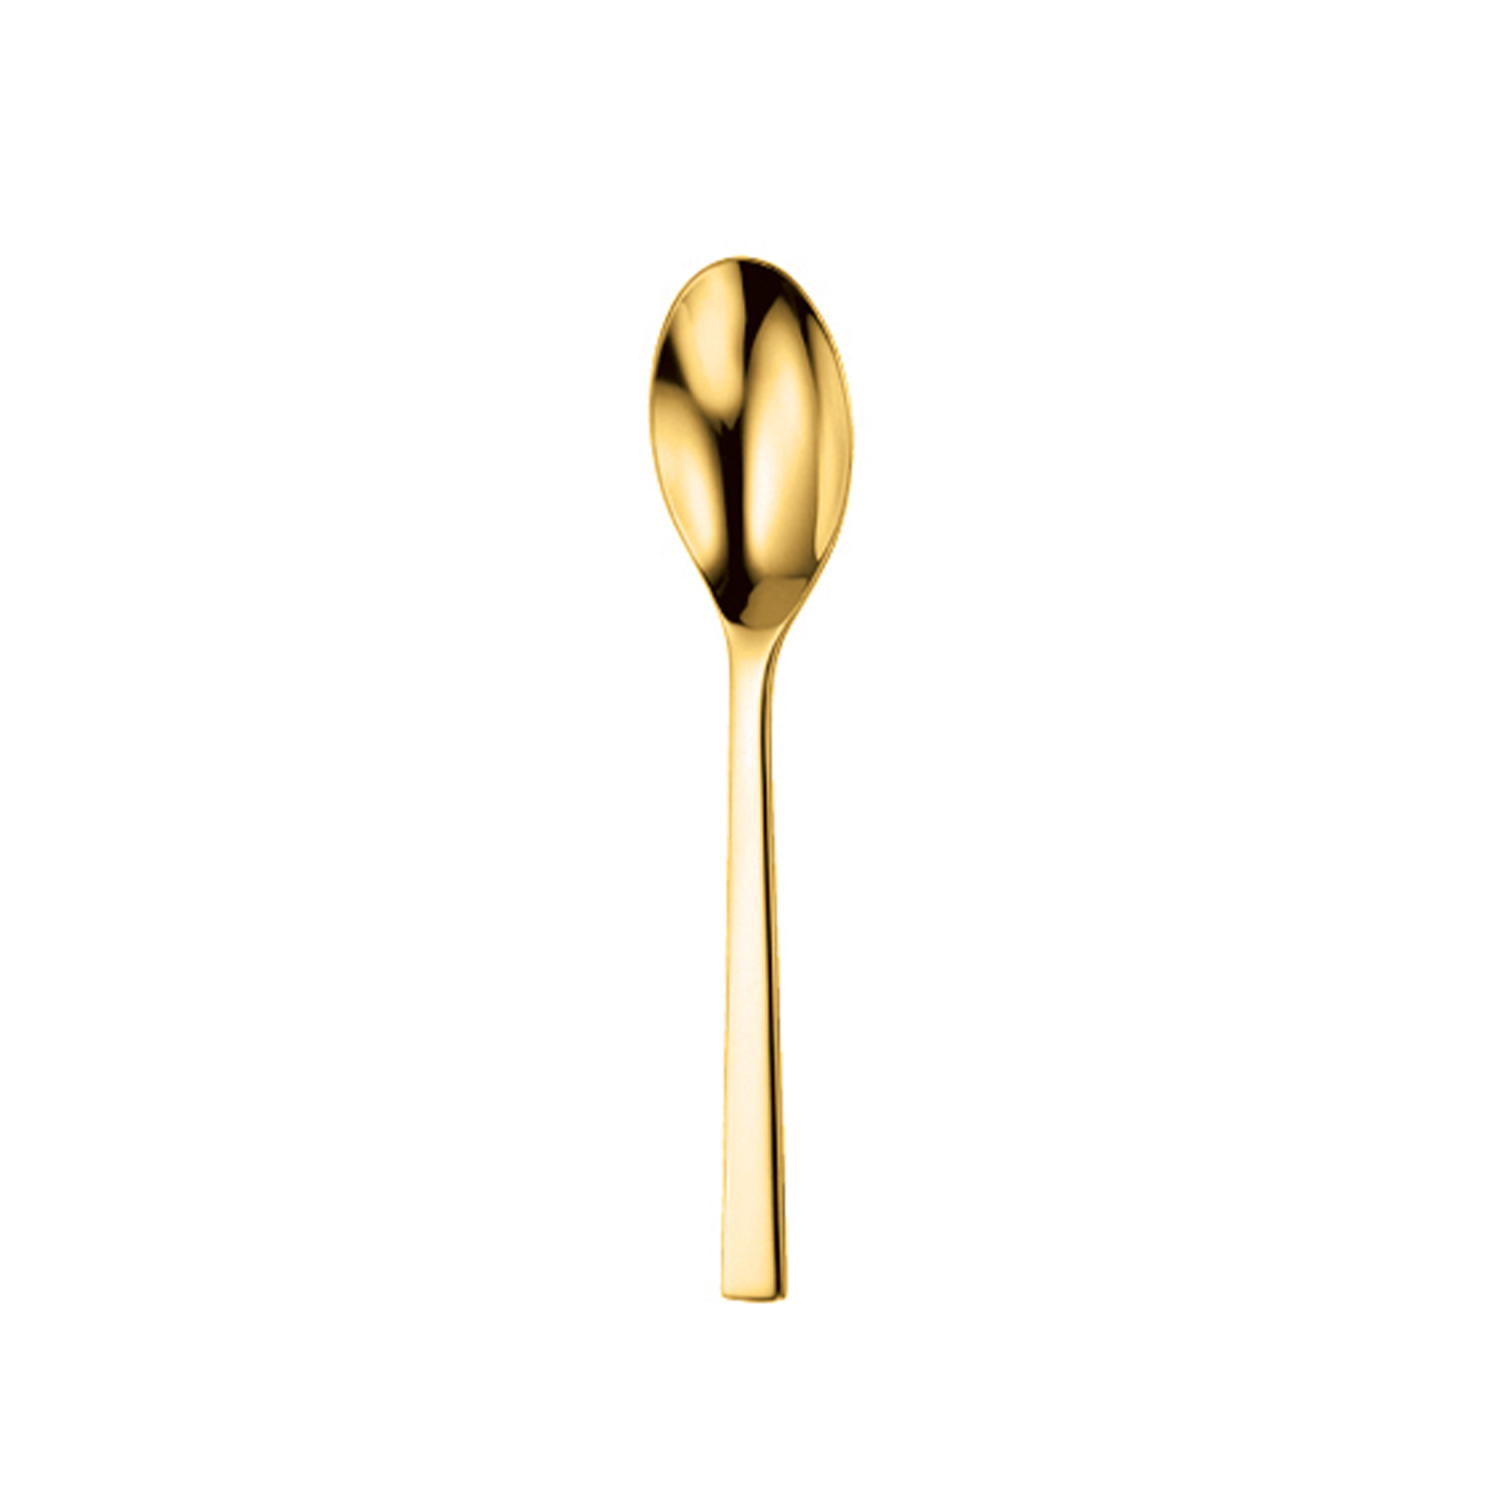 CHEF’S TABLE GOLD OVAL BOWL SOUP/DESSERT SPOON